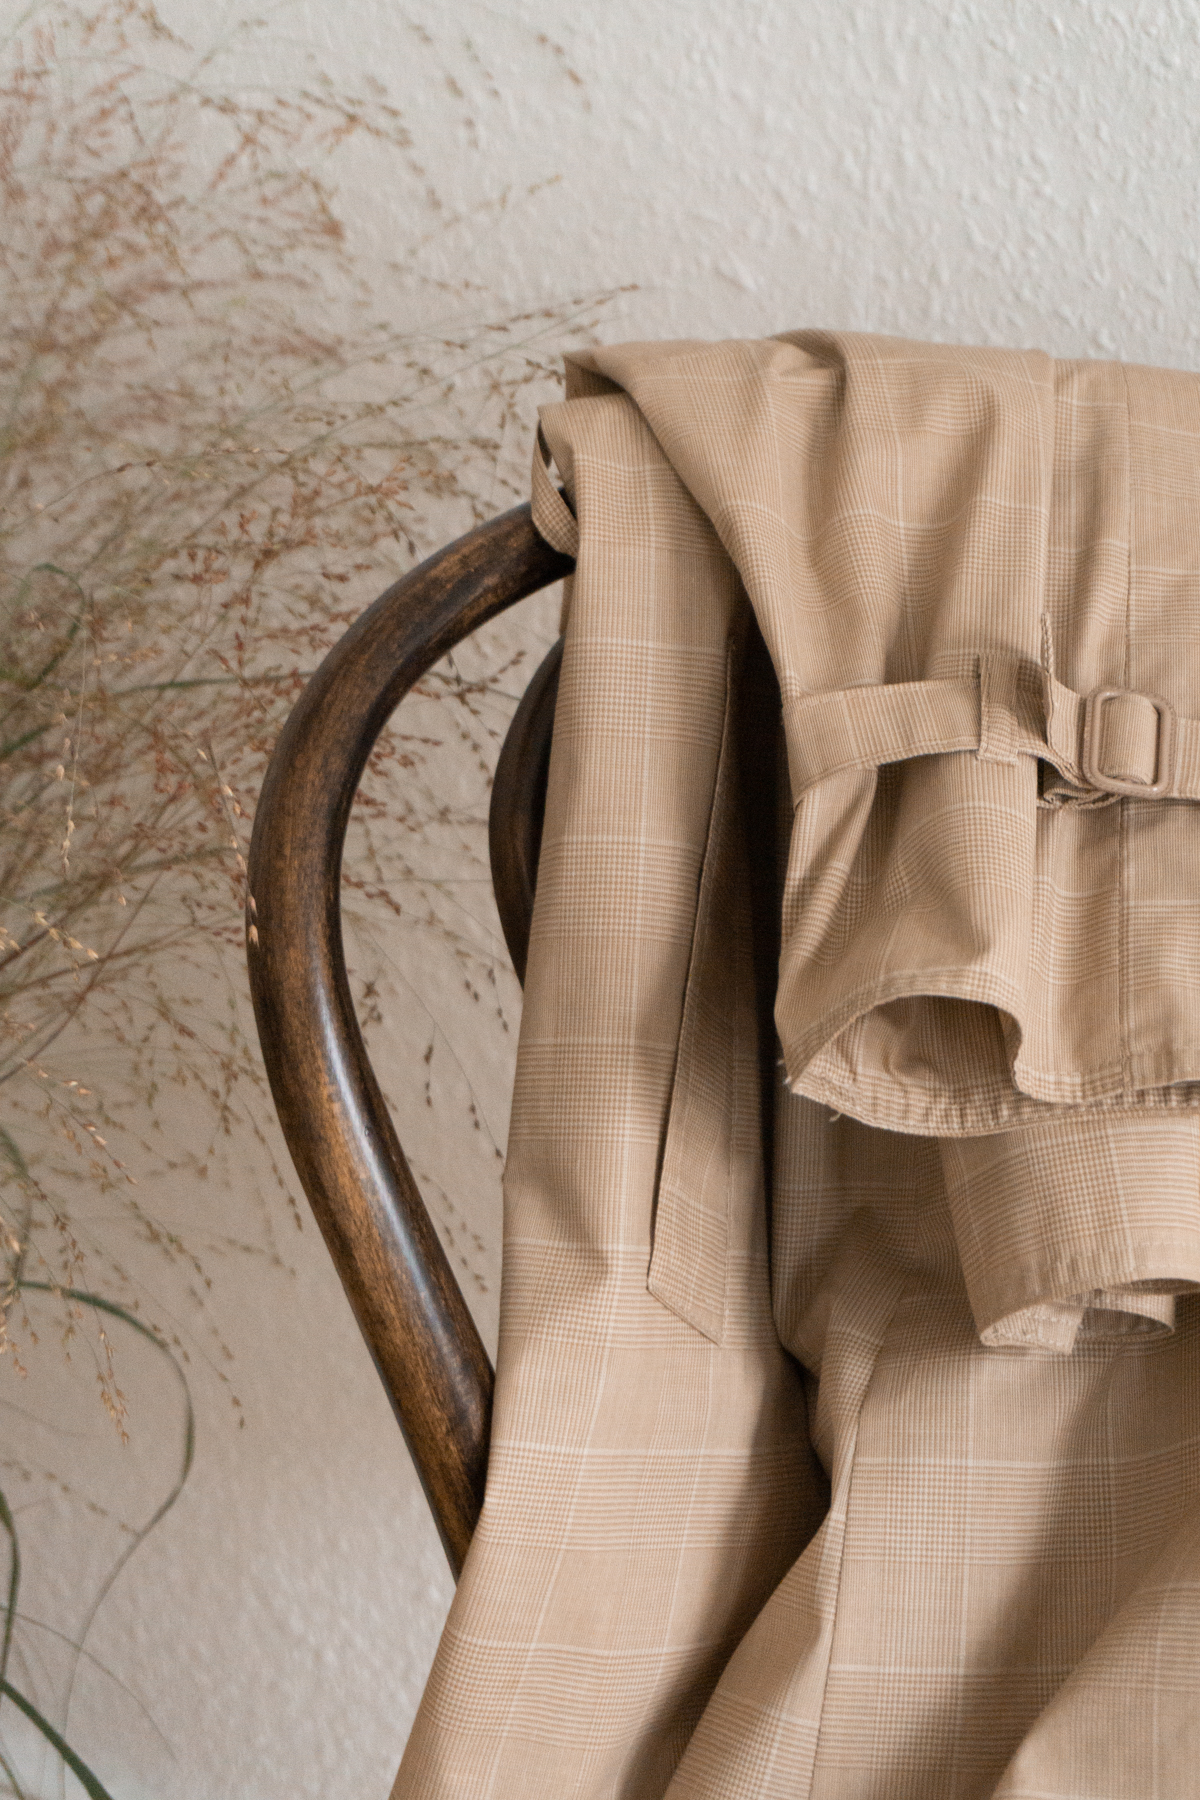 Beige Vintage Trench Coat | Sustainable Second-Hand Fashion | Classic Minimalist Style | StudioKôr Berlin